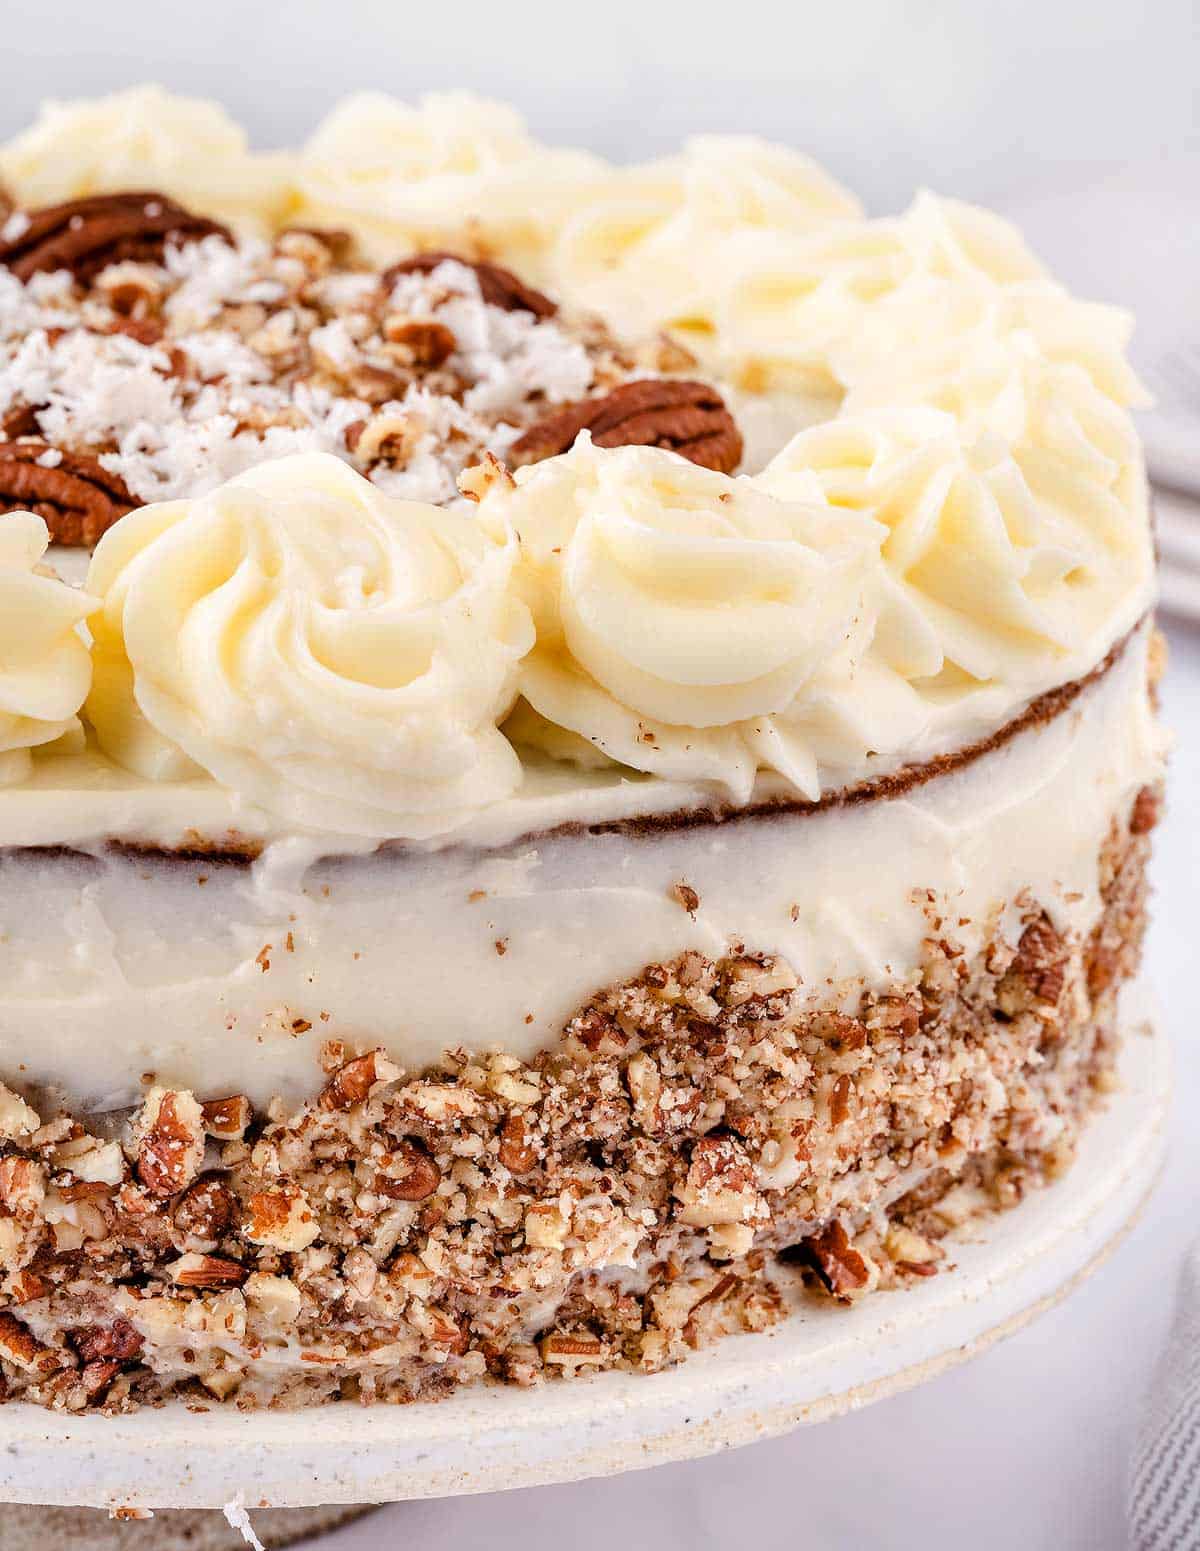 A three-later carrot cake with cream cheese buttercream.